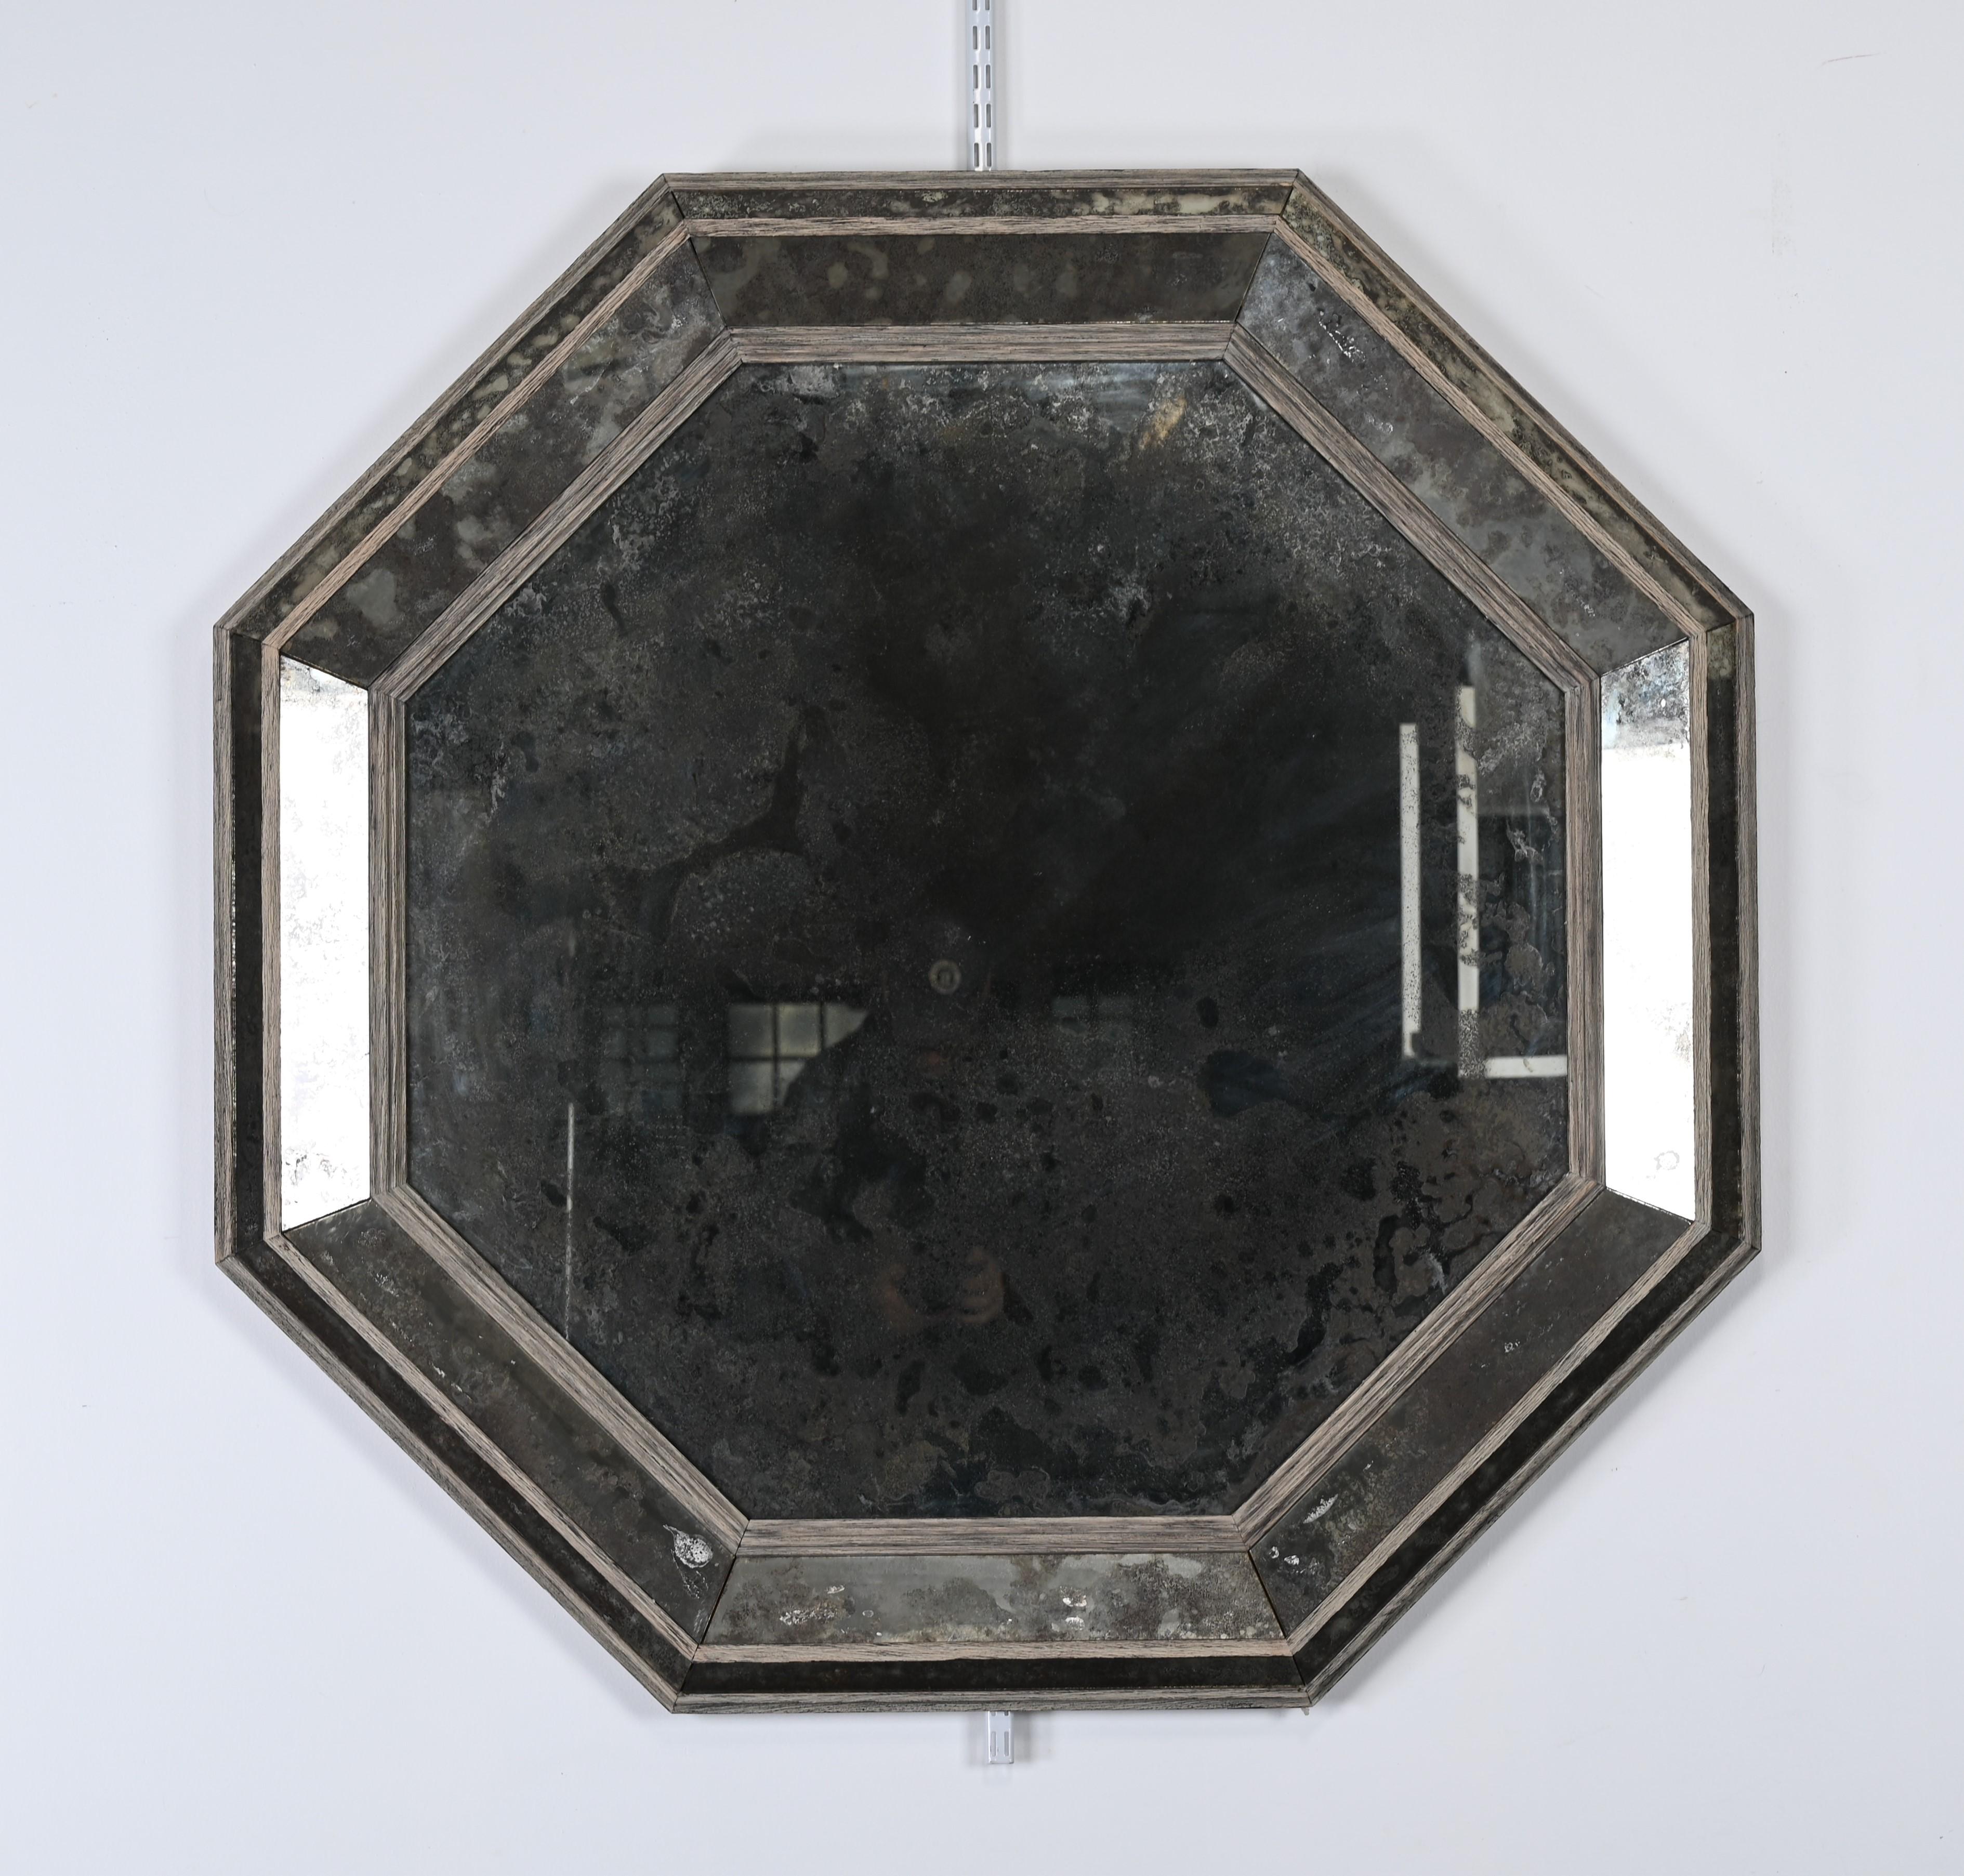 An understated Hollywood Regency-style antiqued mirror in distressed painted grey oak by Niermann Weeks. This designer mirror has great scale and importance. Would look great in a modern or decorative interior. This mirror is structurally sound and